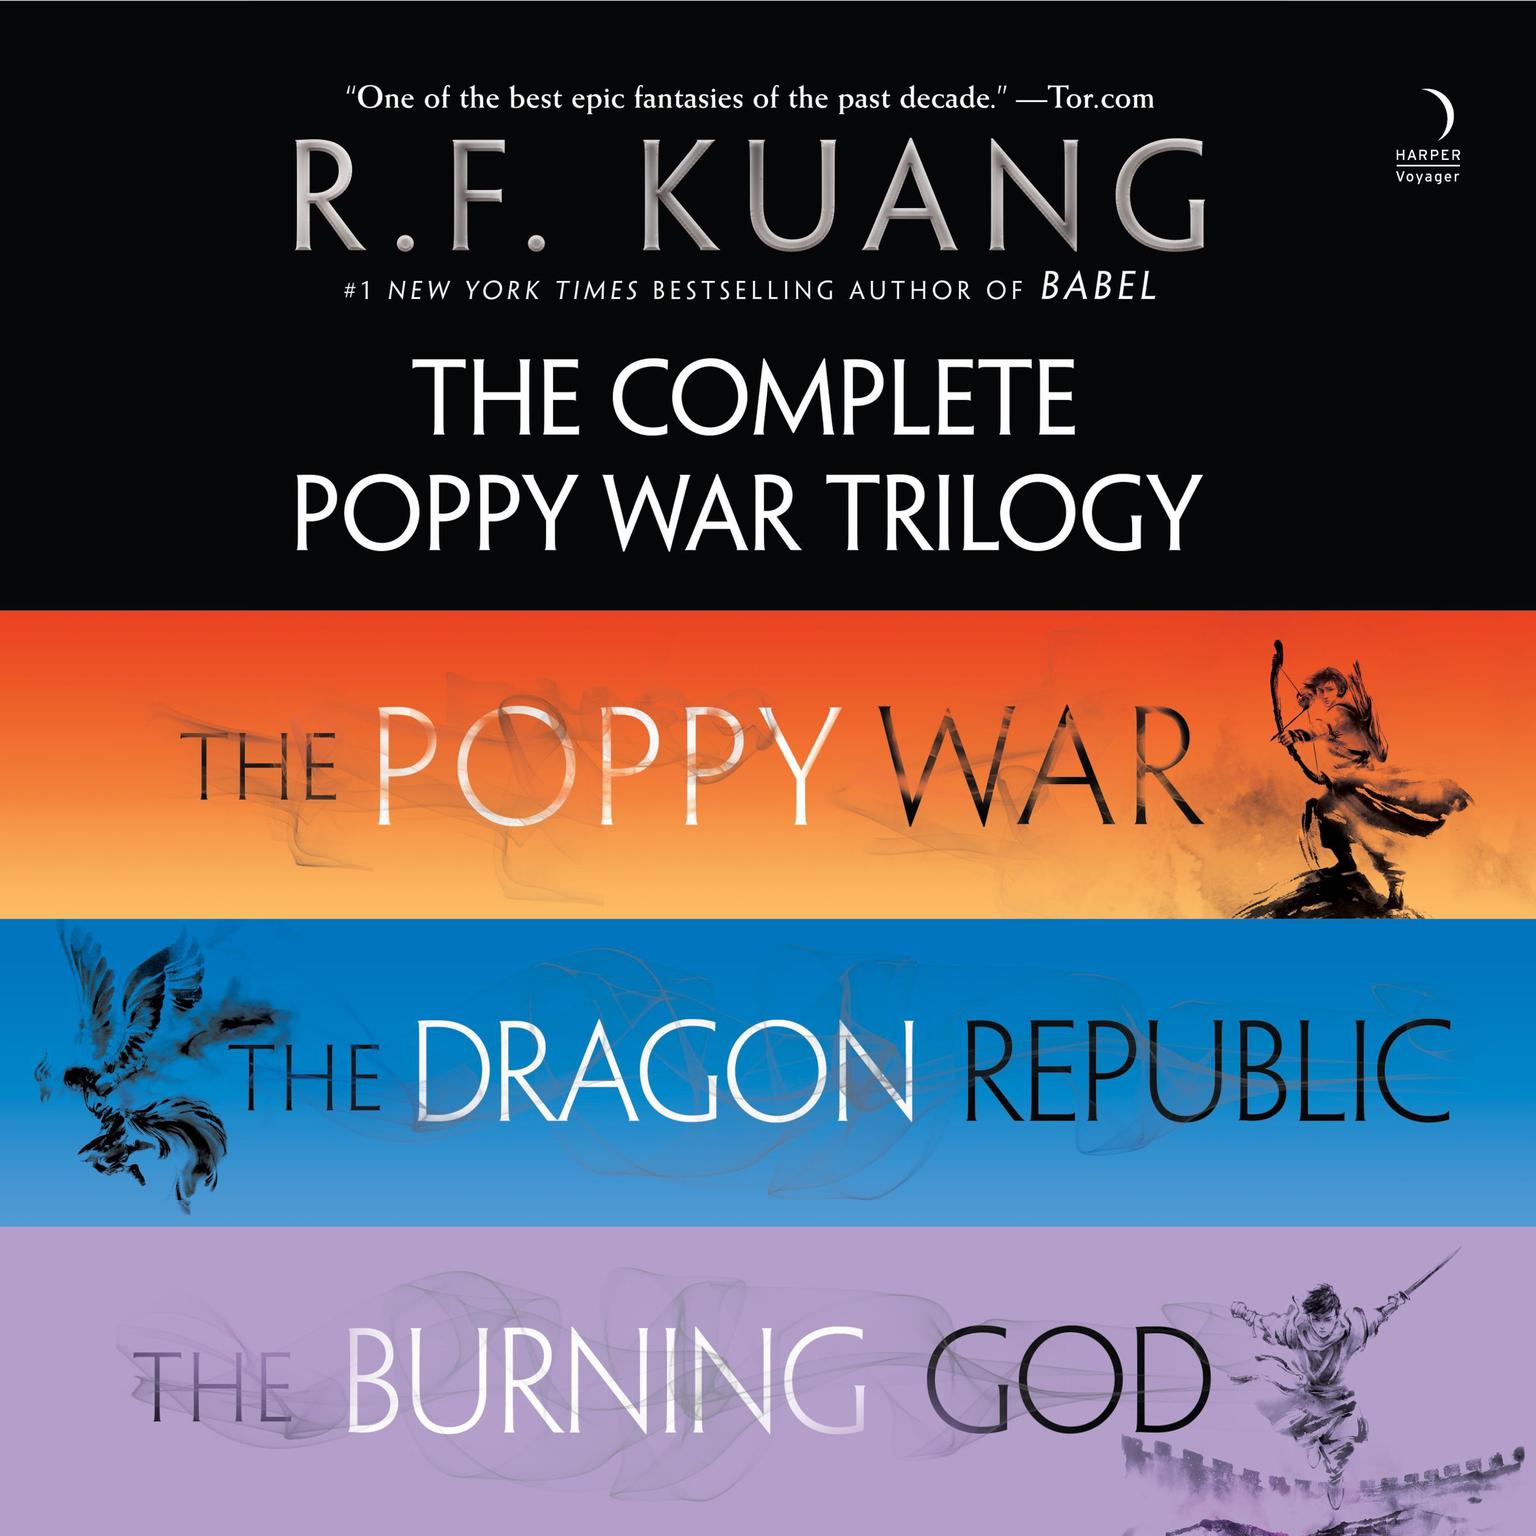 The Complete Poppy War Trilogy: The Poppy War, The Dragon Republic, The Burning God Audiobook, by R. F. Kuang